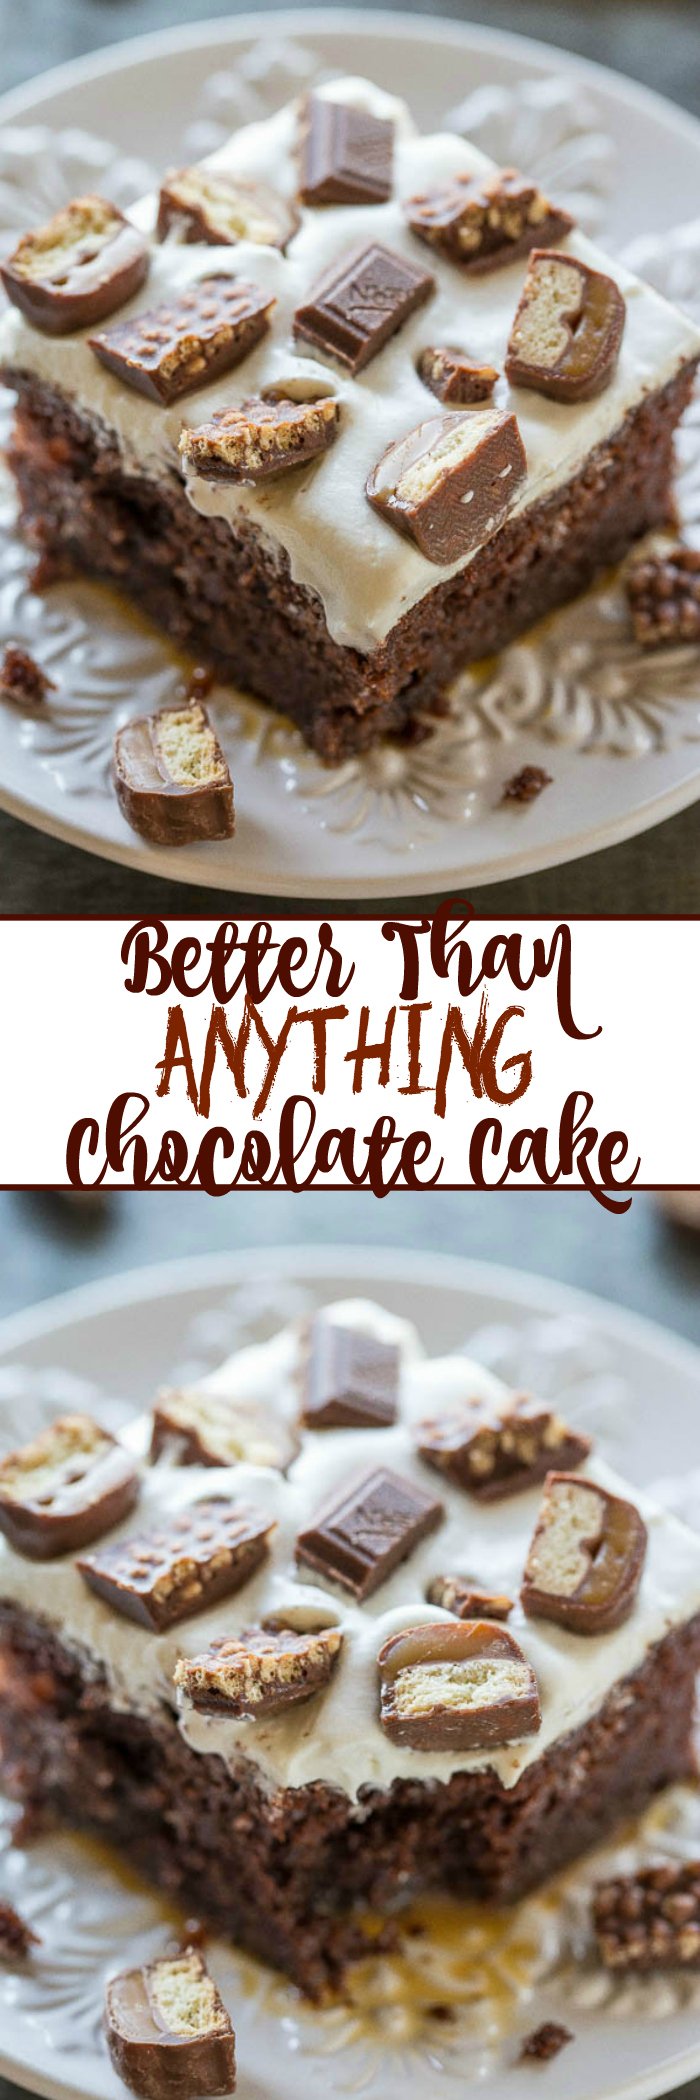 Better-Than-Anything Cake — Worthy of its name and one of the BEST cakes you will EVER eat!! Doesn't get any better than chocolate, caramel, whipped topping, and candy in an easy, no-mixer cake!! A must-make!!